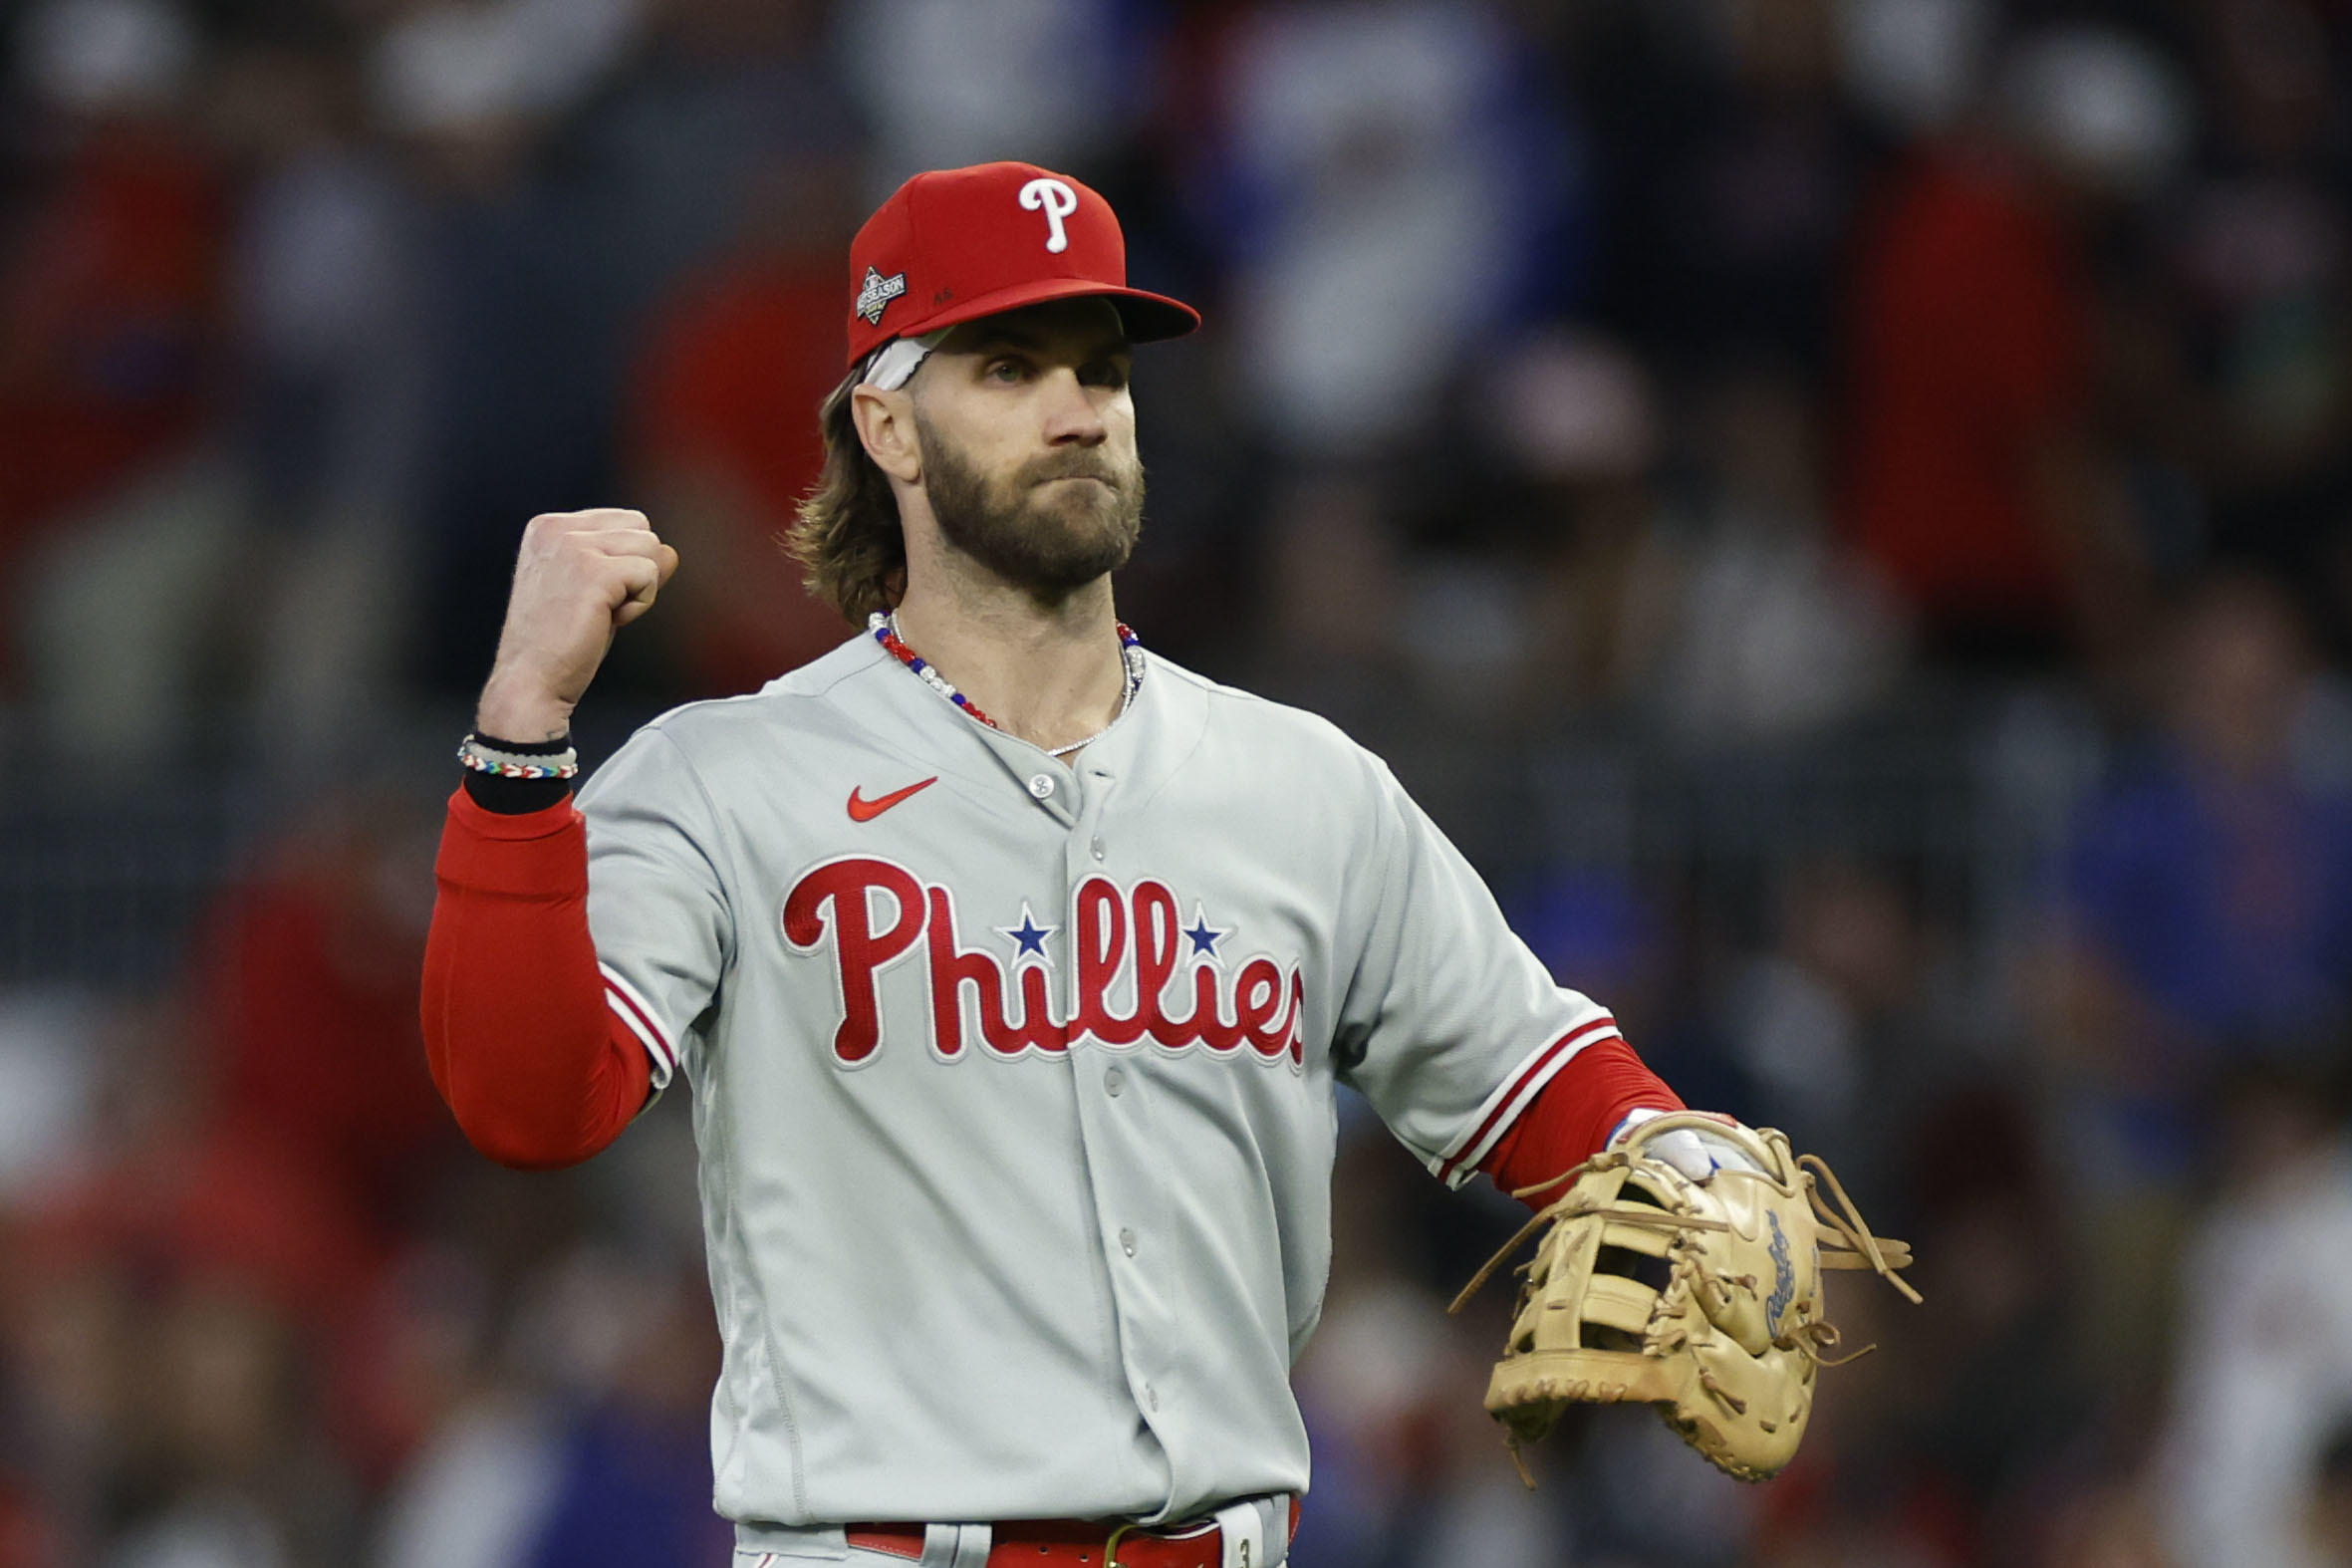 Bryce Harper's key role in the Game 1 of the Phillies-Braves NLDS